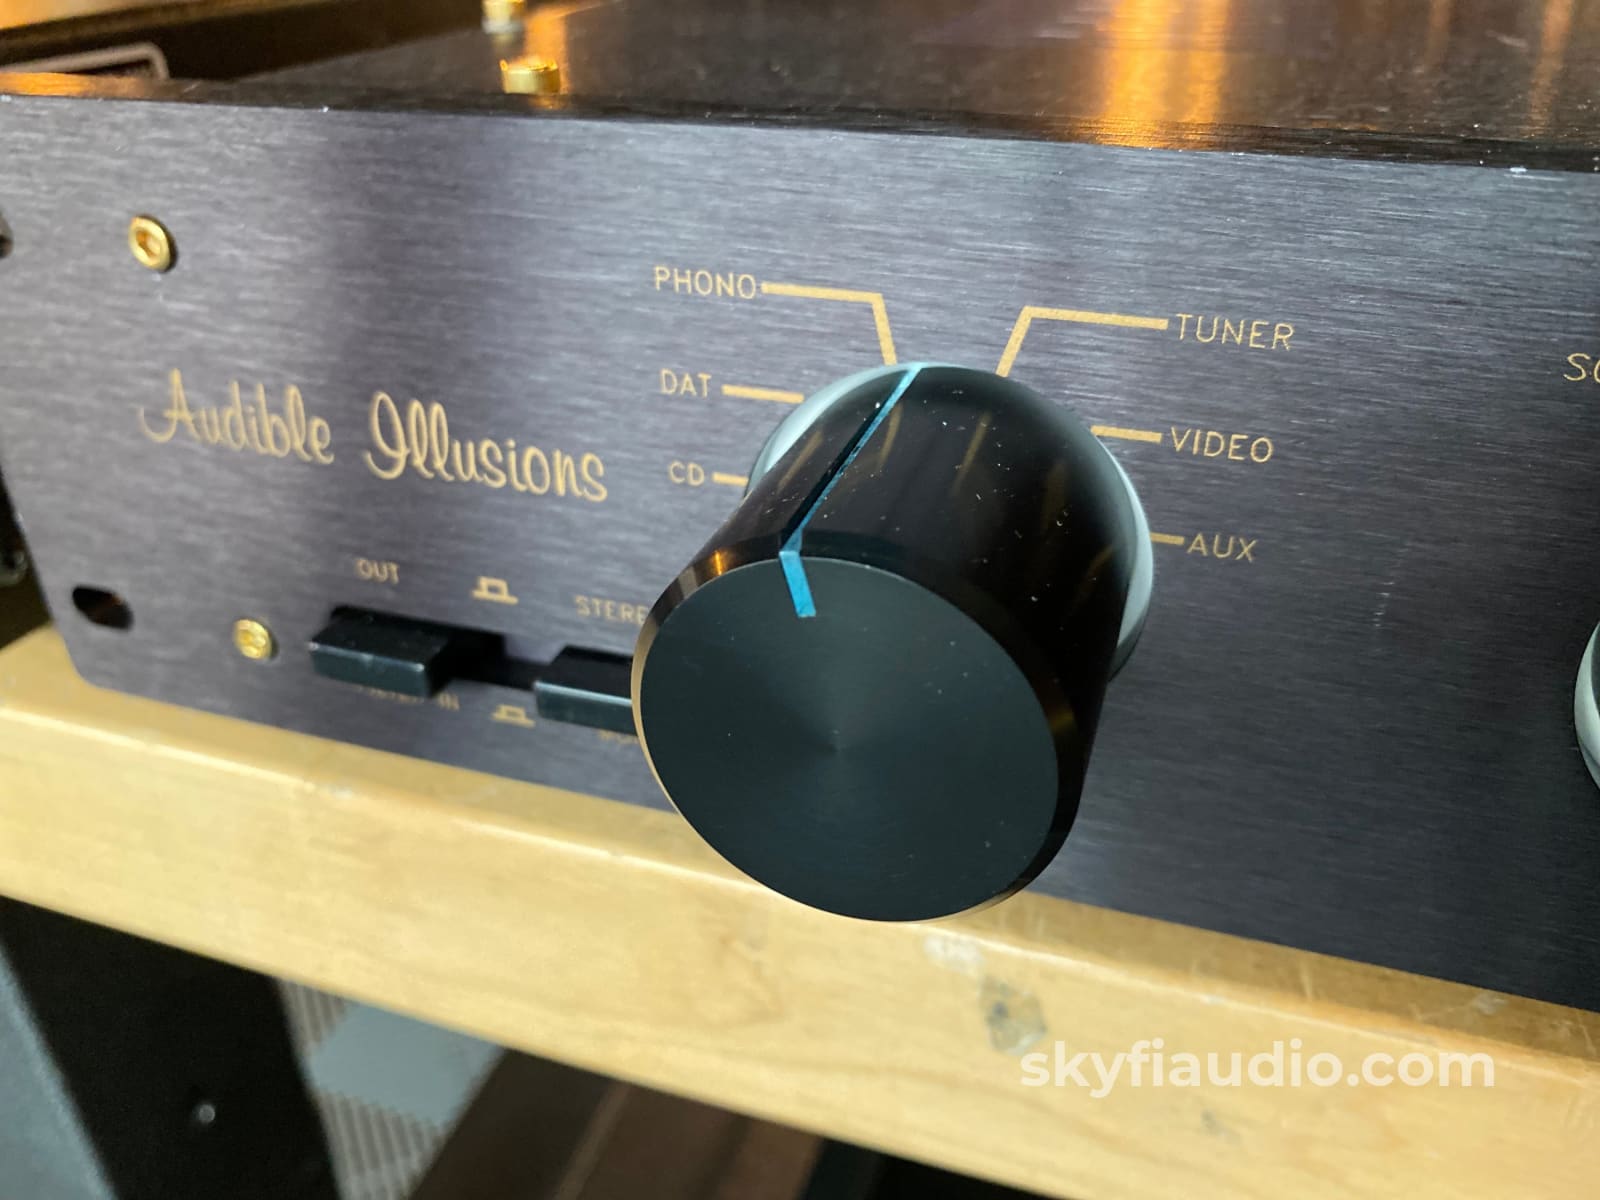 Audible Illusions Modulus 3A Tube Preamplifier With Phono